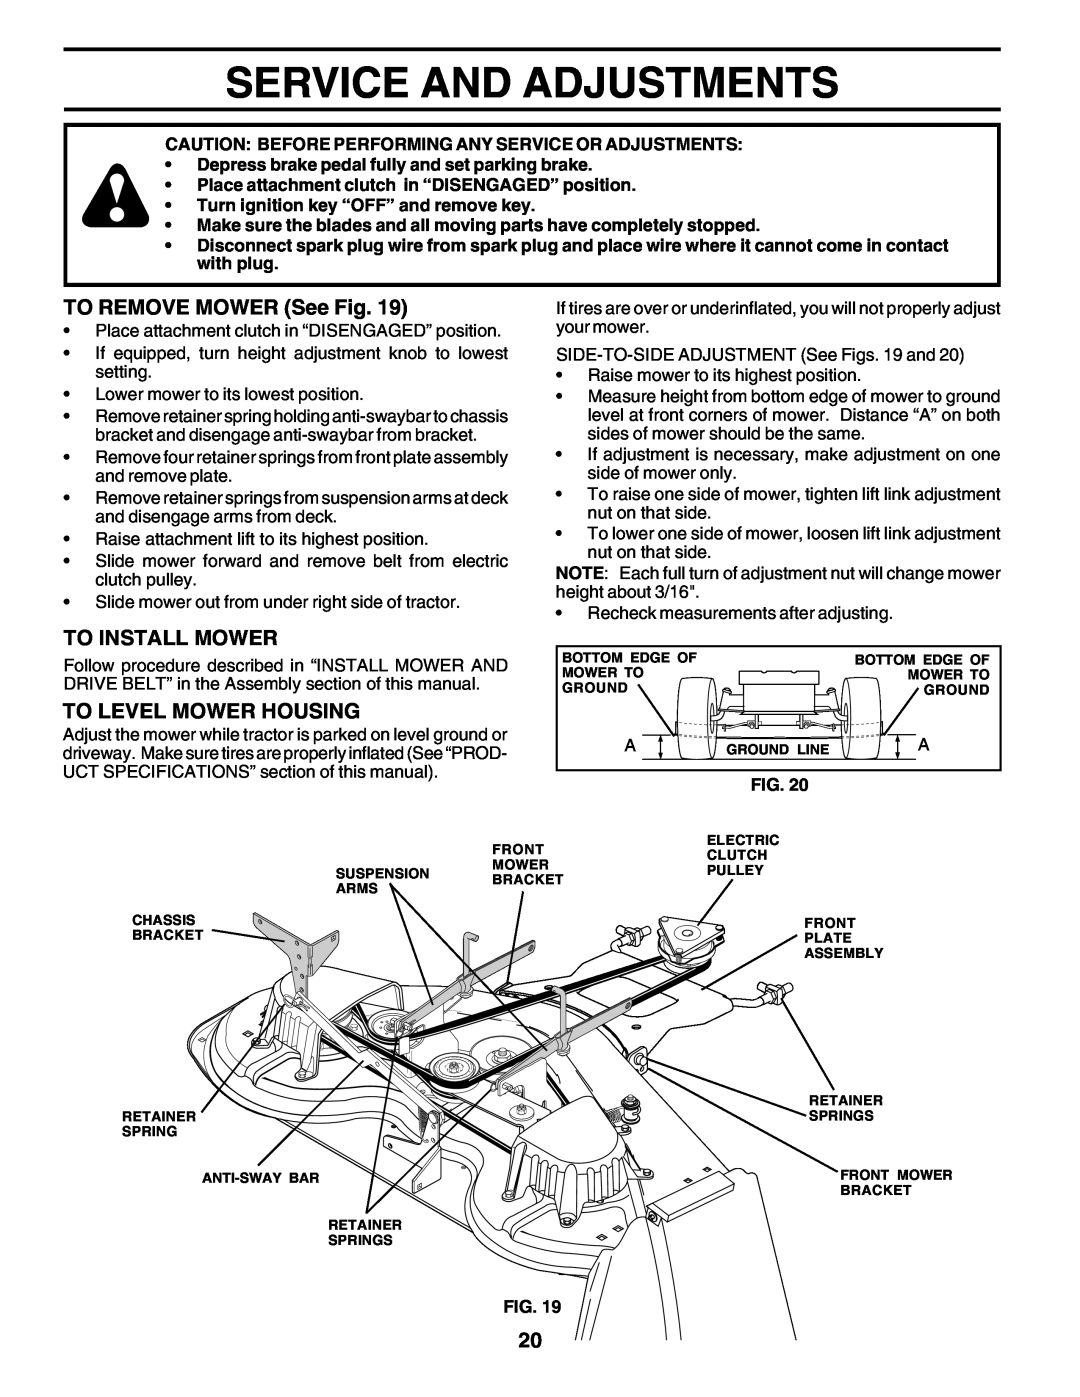 Poulan 178497 owner manual Service And Adjustments, TO REMOVE MOWER See Fig, To Install Mower, To Level Mower Housing 